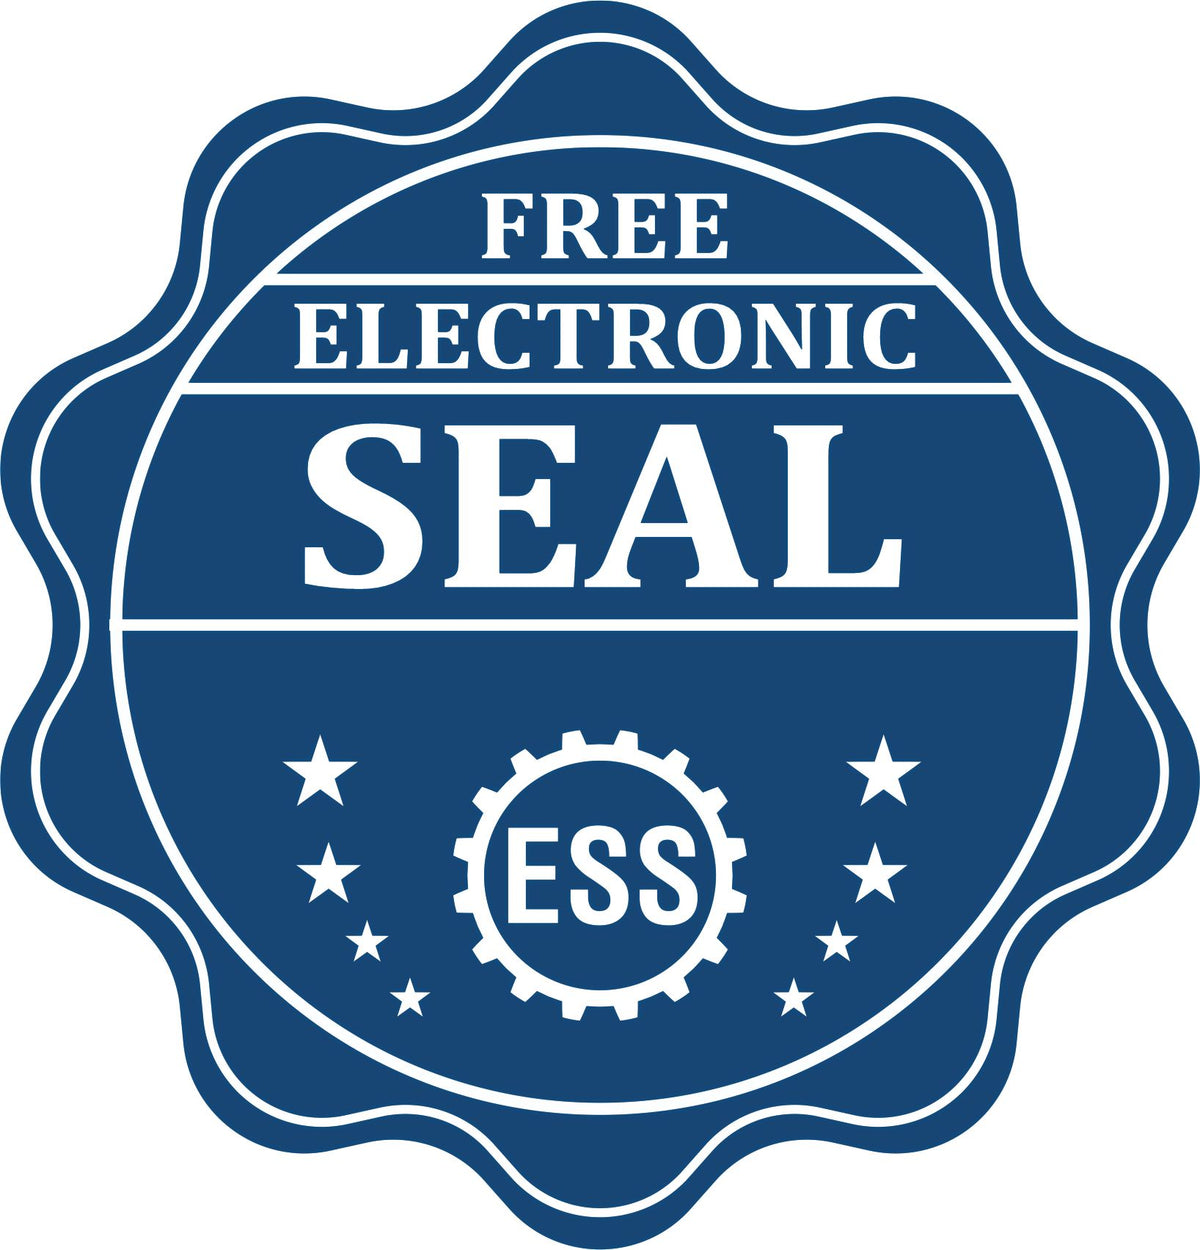 A badge showing a free electronic seal for the Soft Pocket Ohio Landscape Architect Embosser with stars and the ESS gear on the emblem.